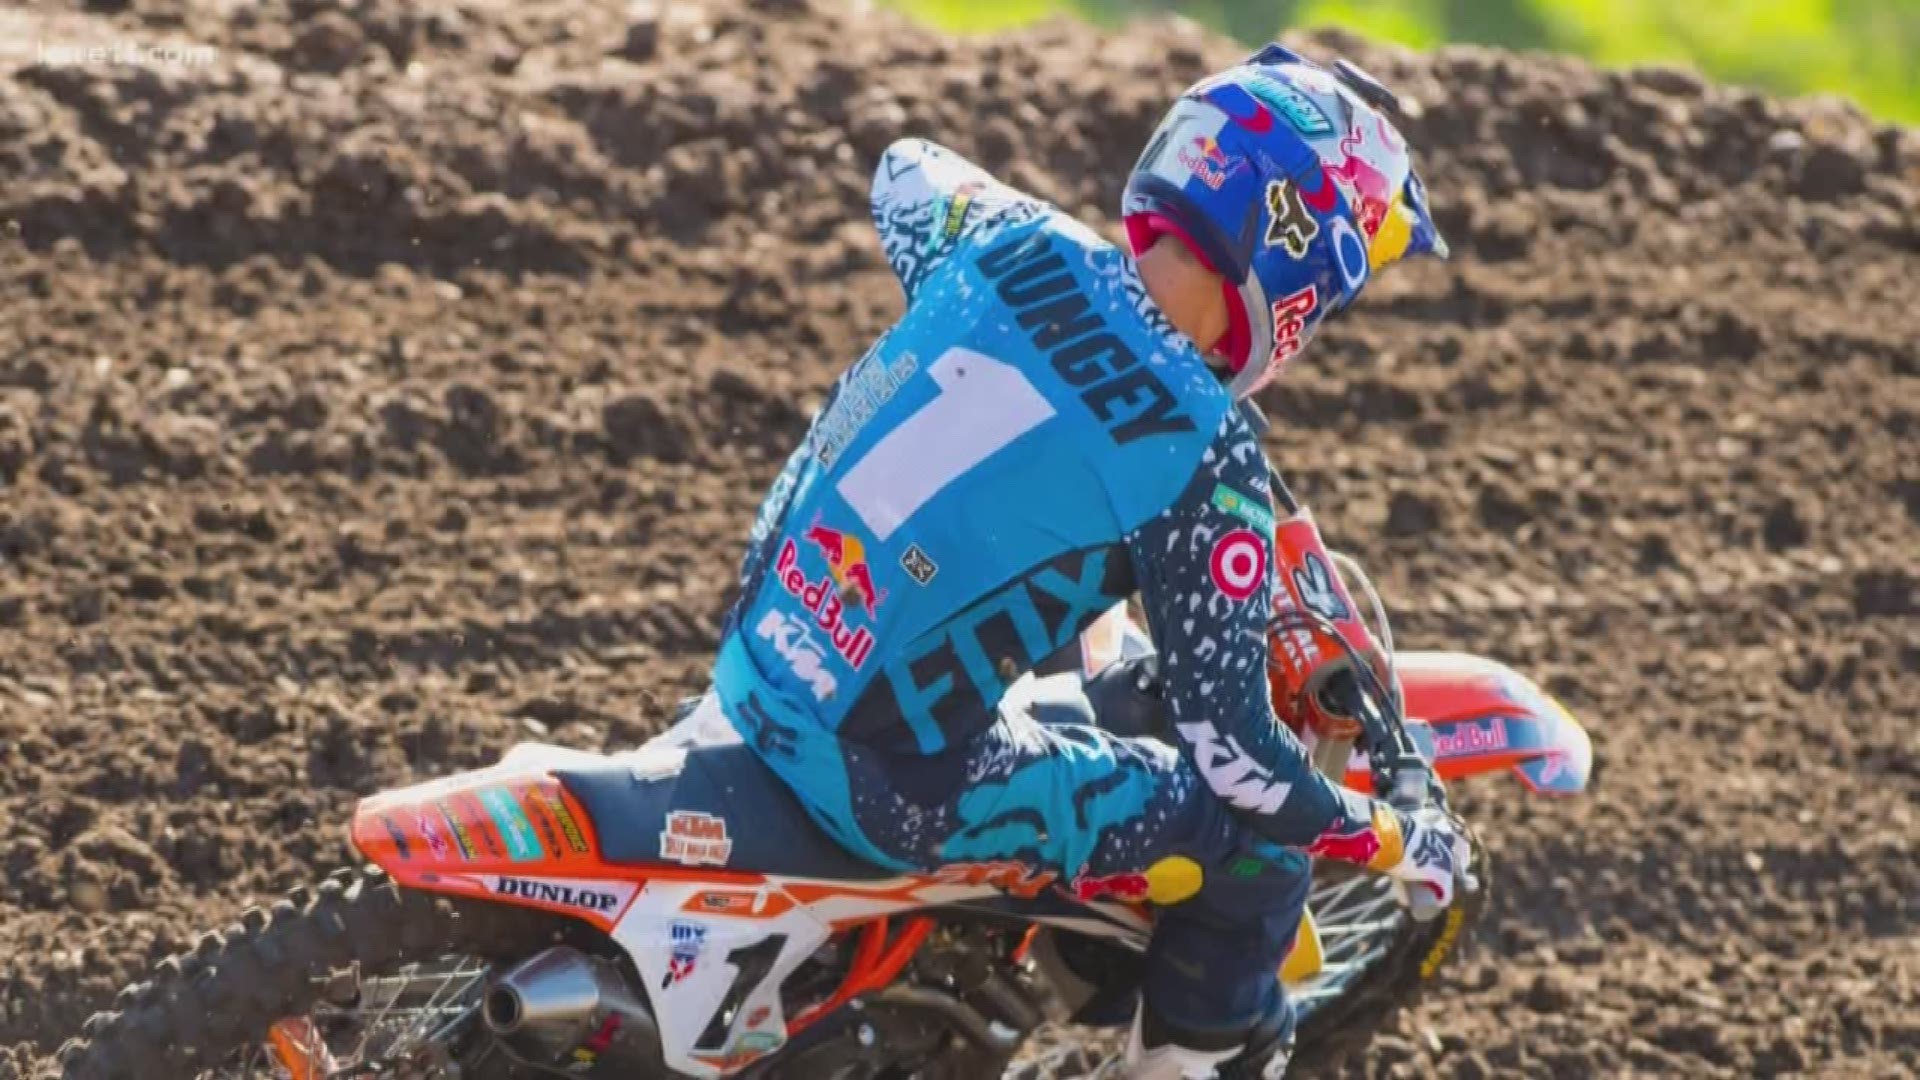 Minnesota native Ryan Dungey is one of the motocross’ greats, ranking 2nd on the all-time win list and earning 9 championships throughout his professional career.